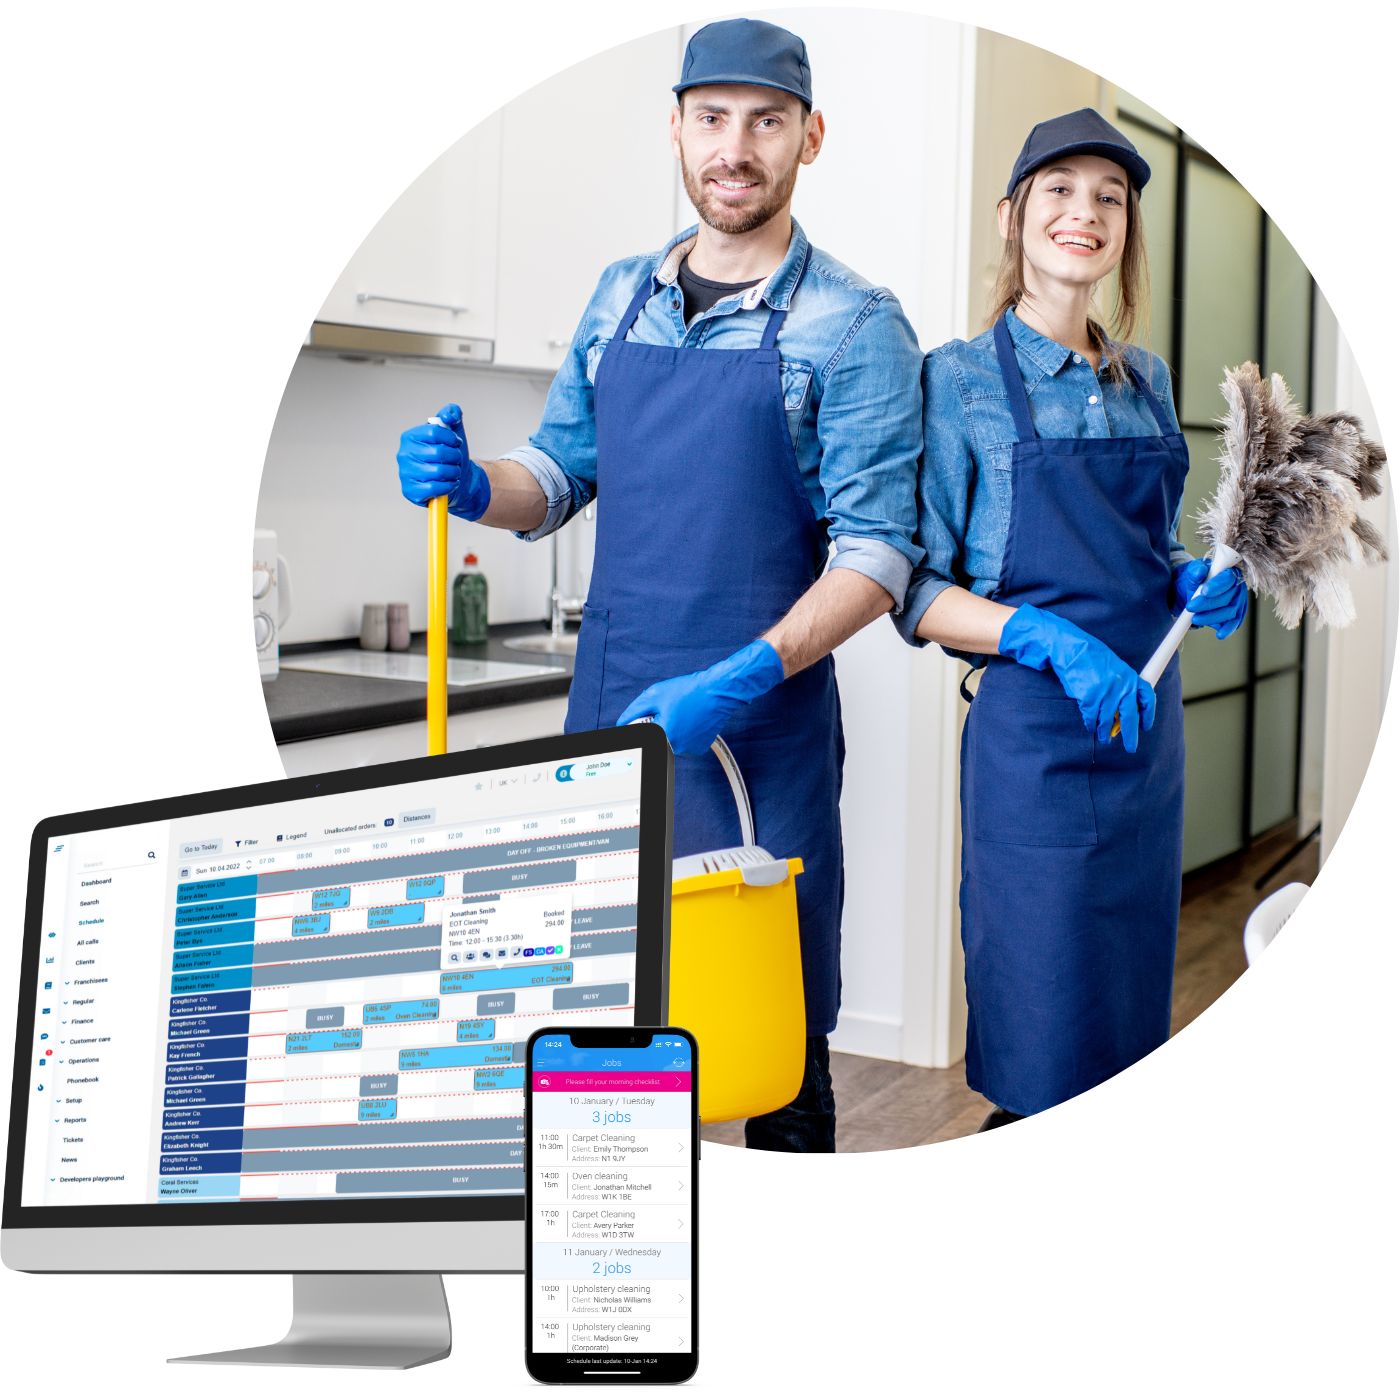 Run a Domestic cleaning company without headaches with ServiceOS